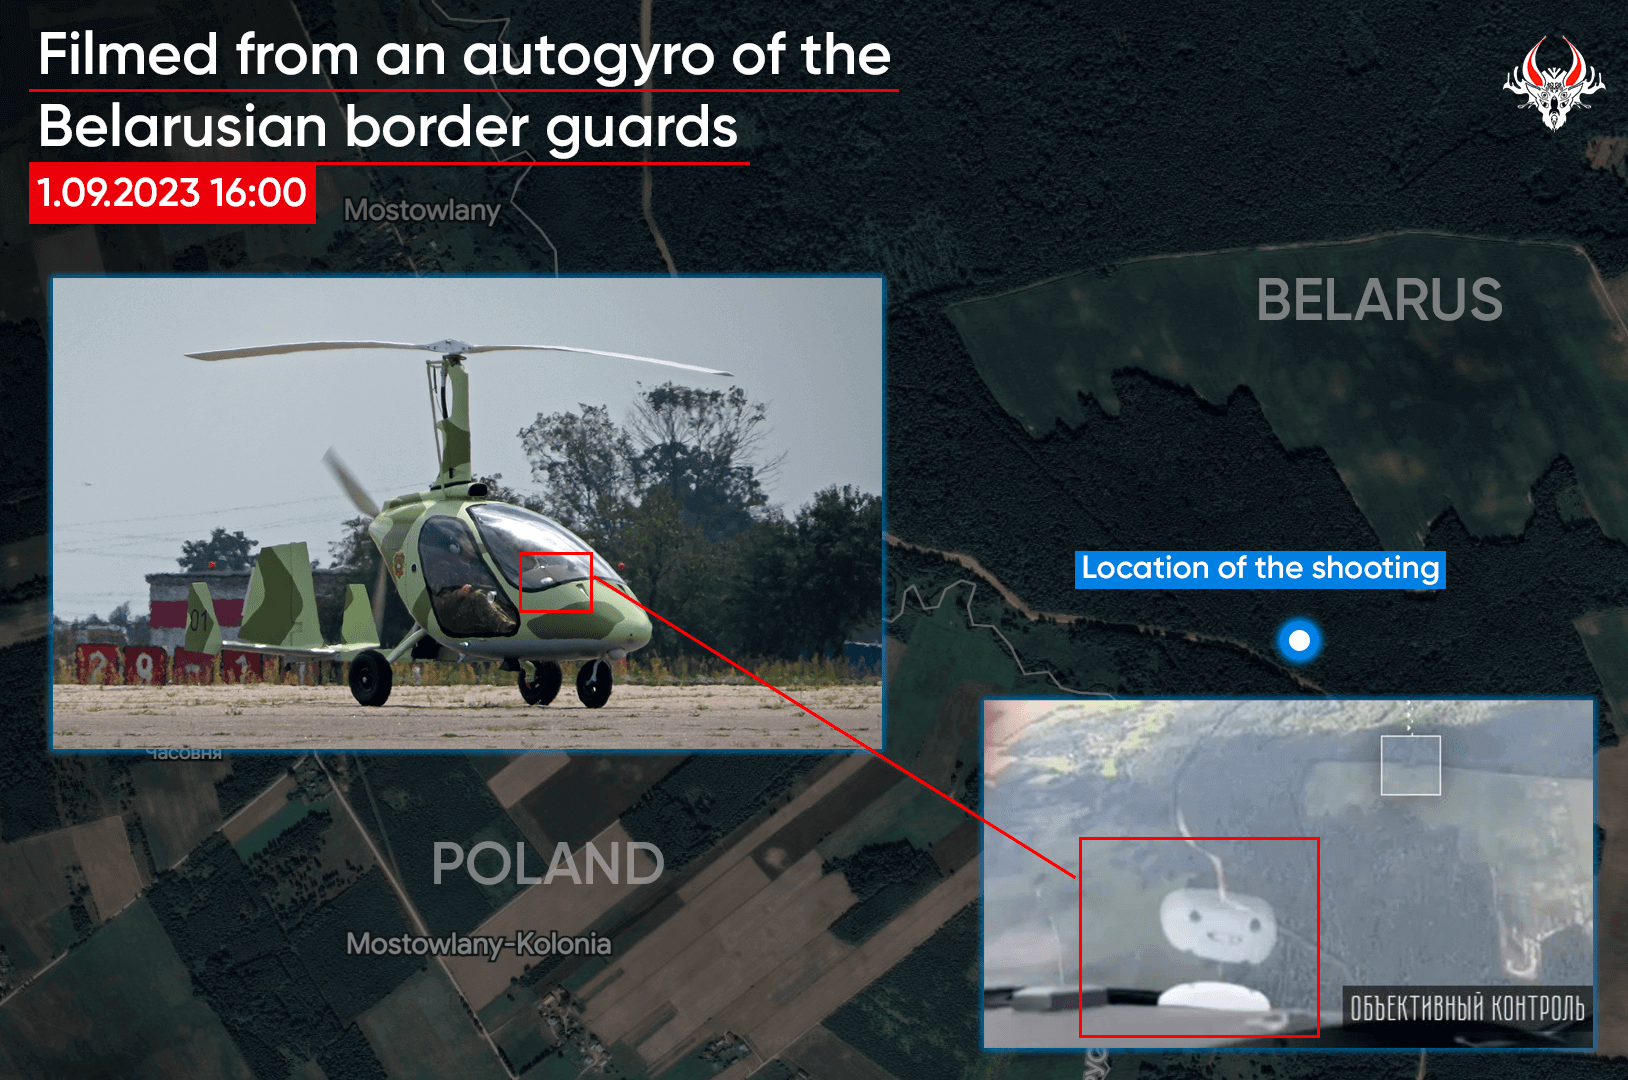 Filmed from an autogyro of the Belarusian border guards